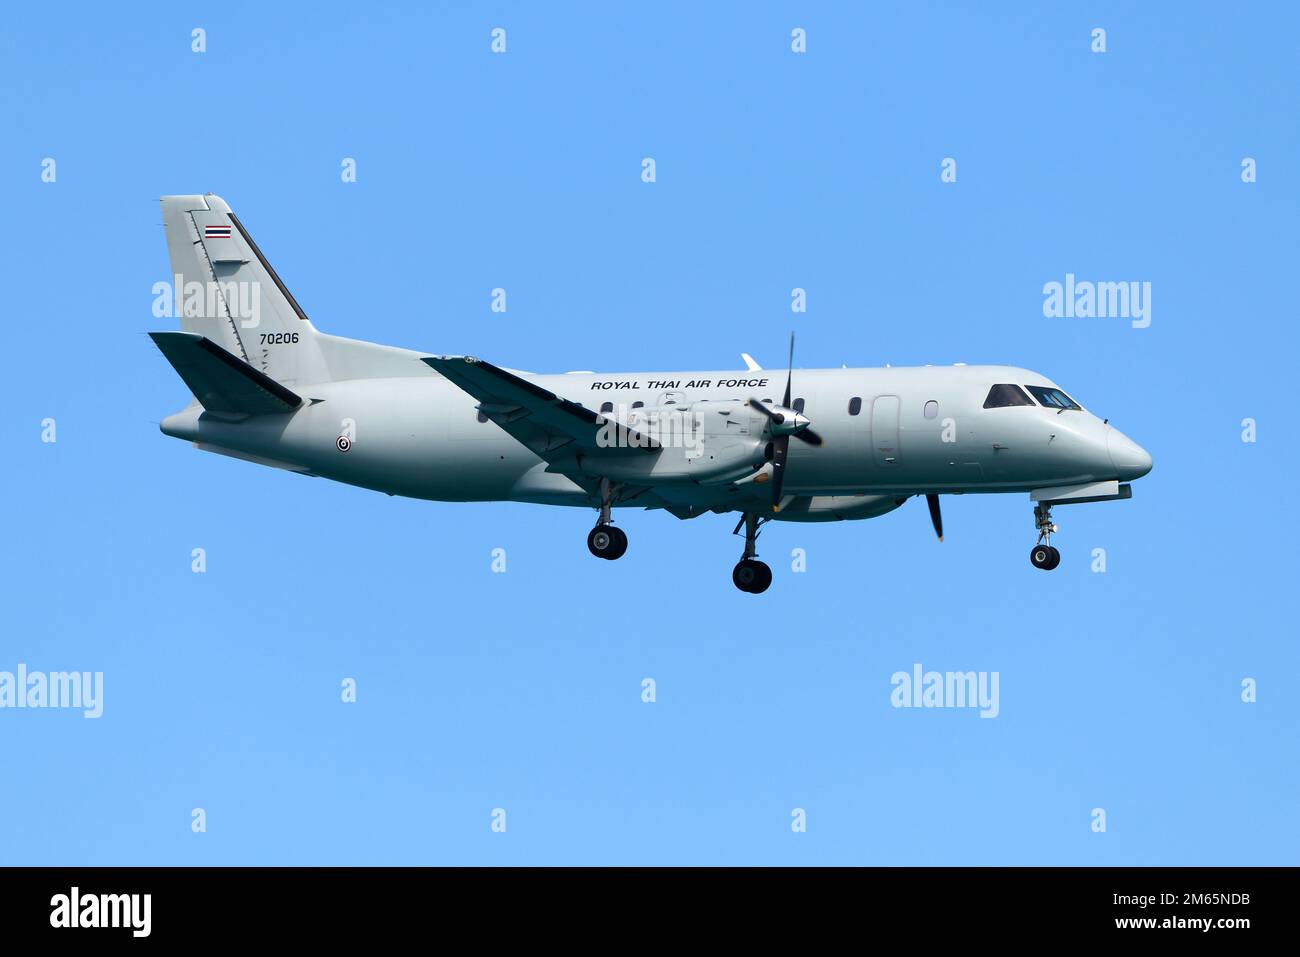 Royal Thai Air Force Saab 340 aircraft flying. Airplane of the Royal Thai Air Force registered as 70206. Stock Photo